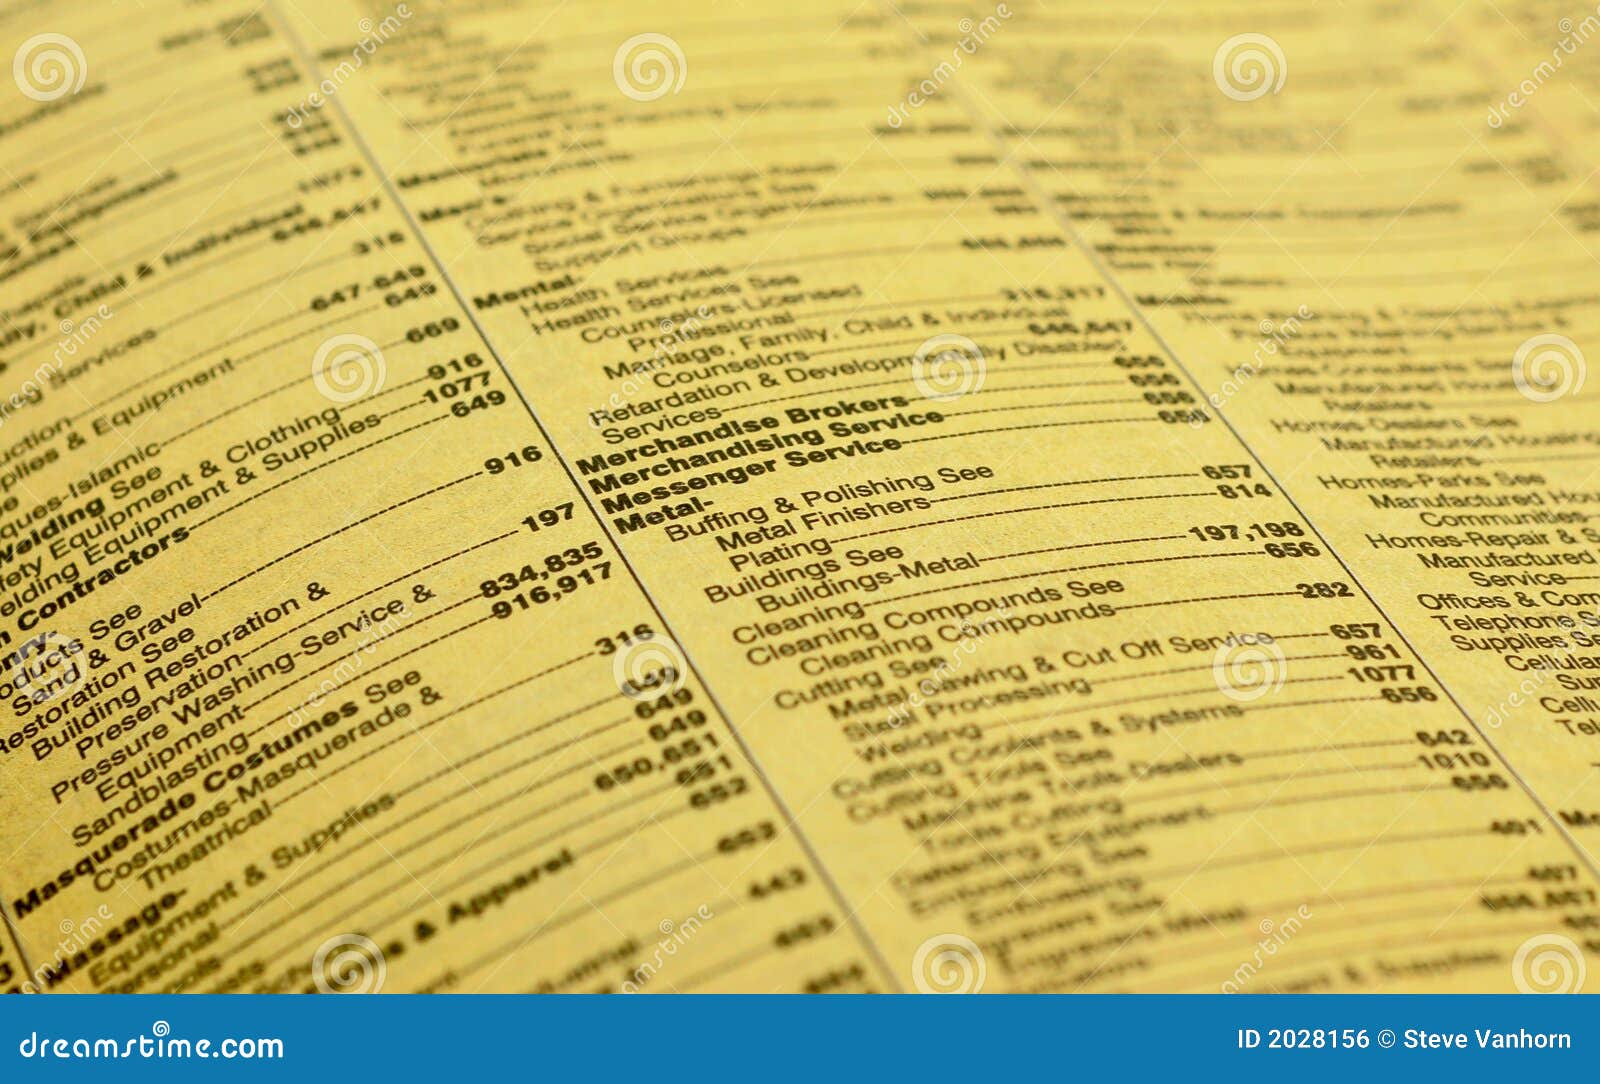 Yellow Pages Royalty Free Stock Image - Image: 2028156